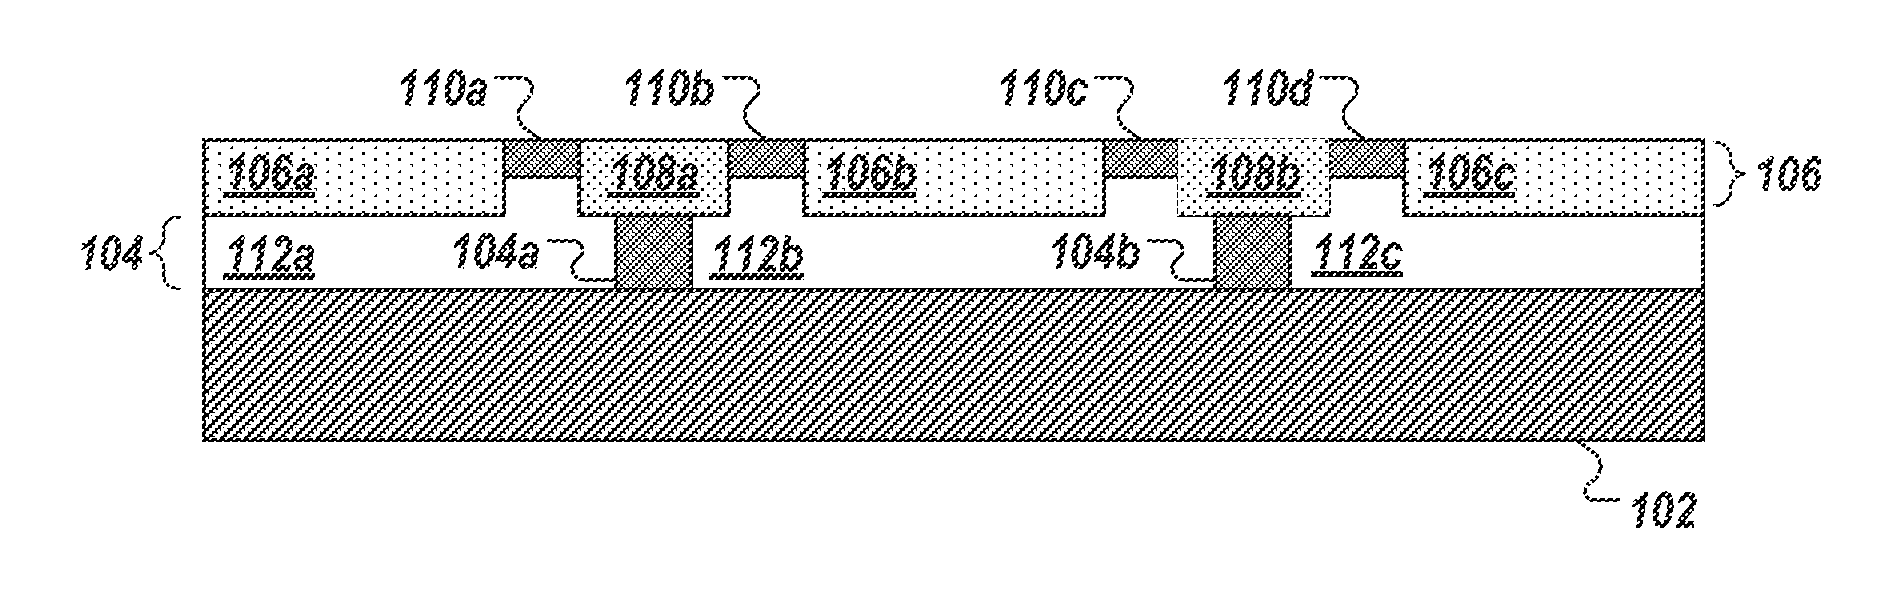 Systems and methods for controlling release of transferable semiconductor structures